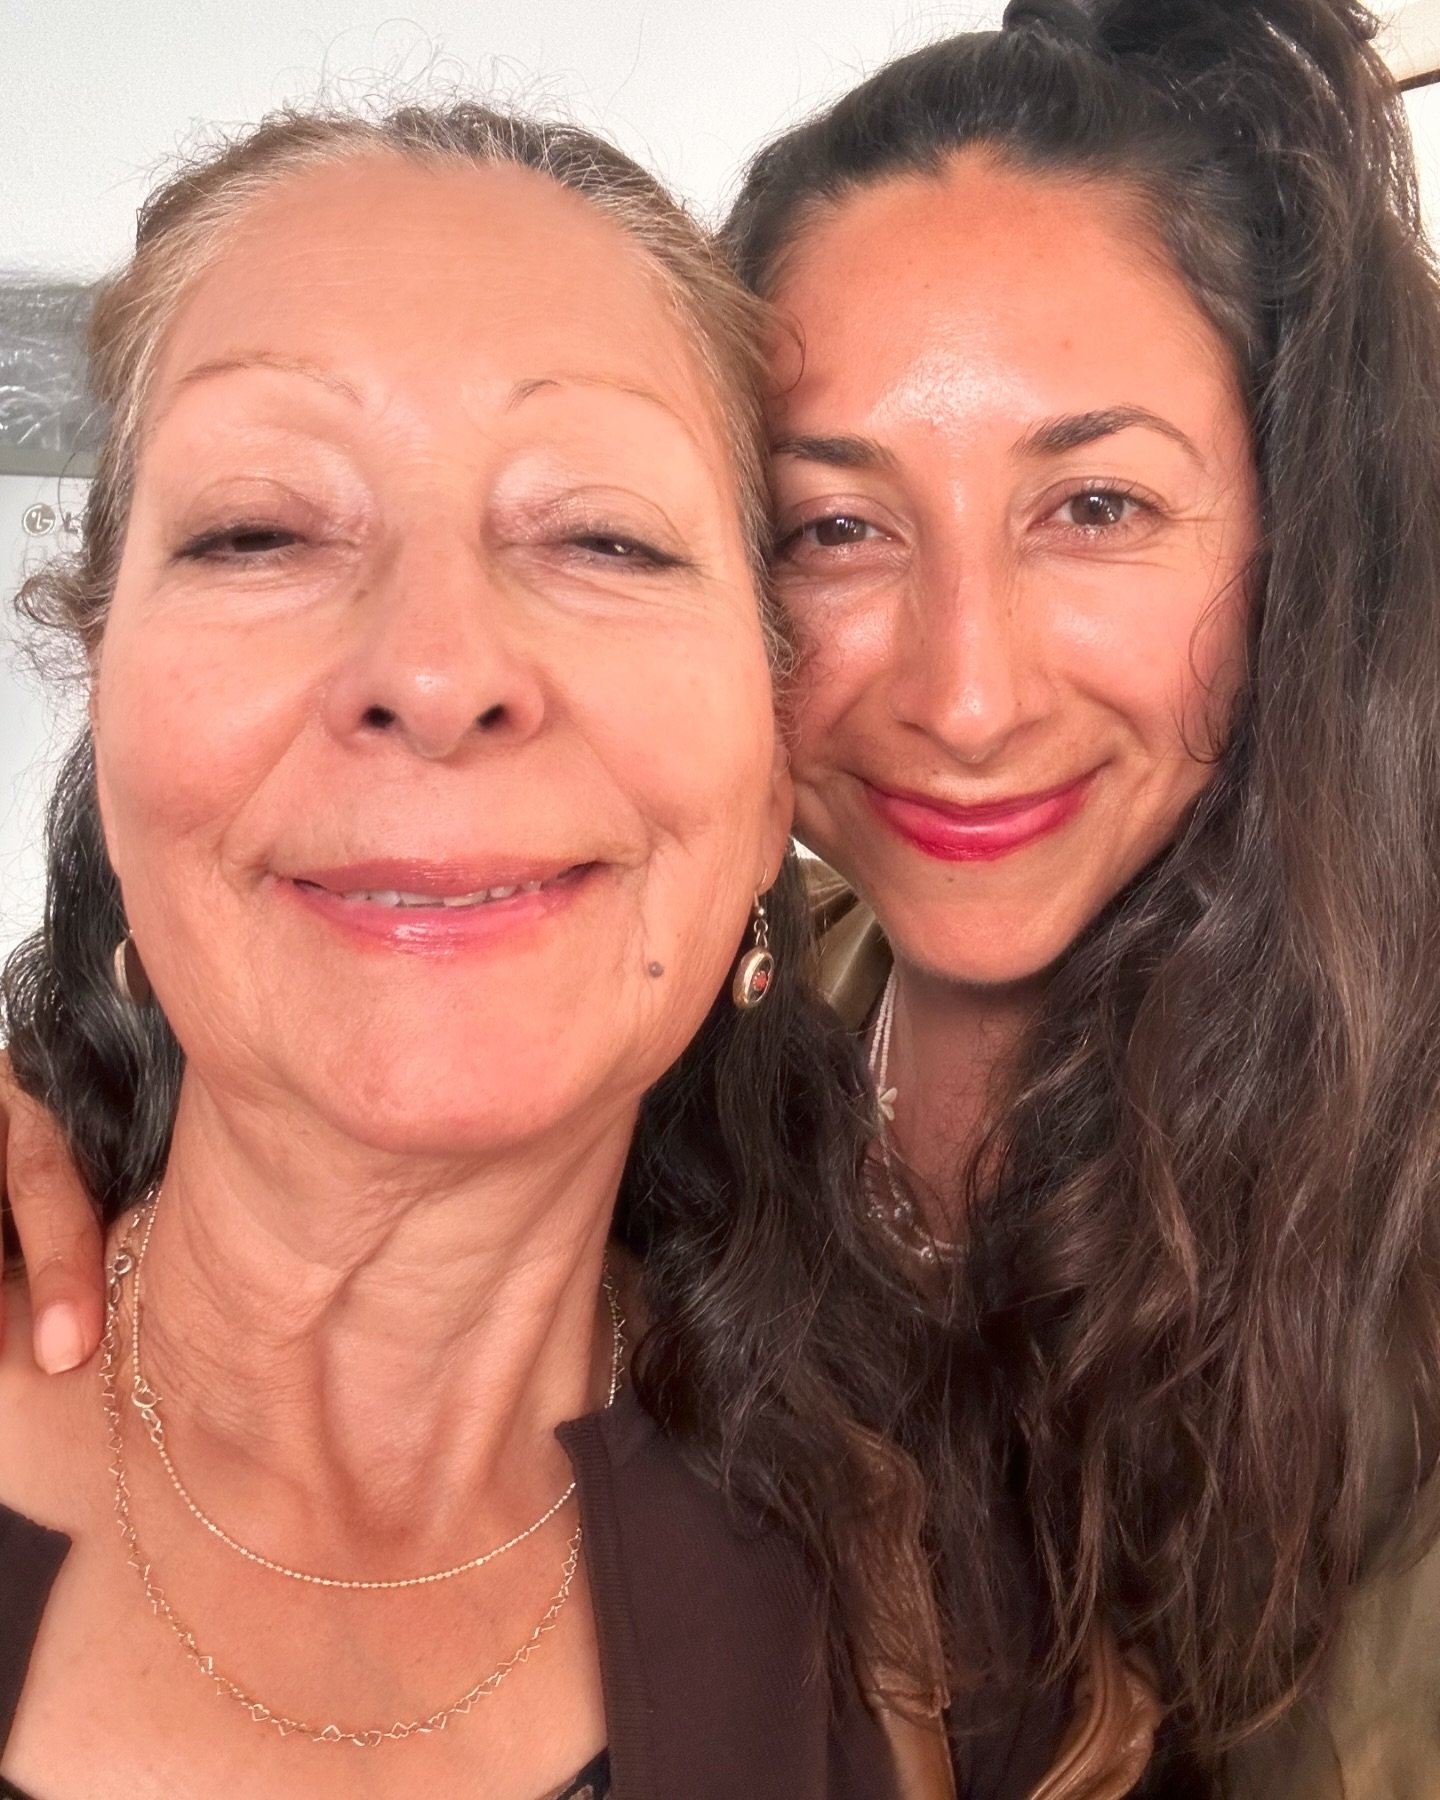 Happy Mother&rsquo;s Day to my mama and all the mothers who are here today and to the ones whose spirits are around us. To all the mother&rsquo;s in whatever form you&rsquo;re a mother in! 
❤️🌹❤️